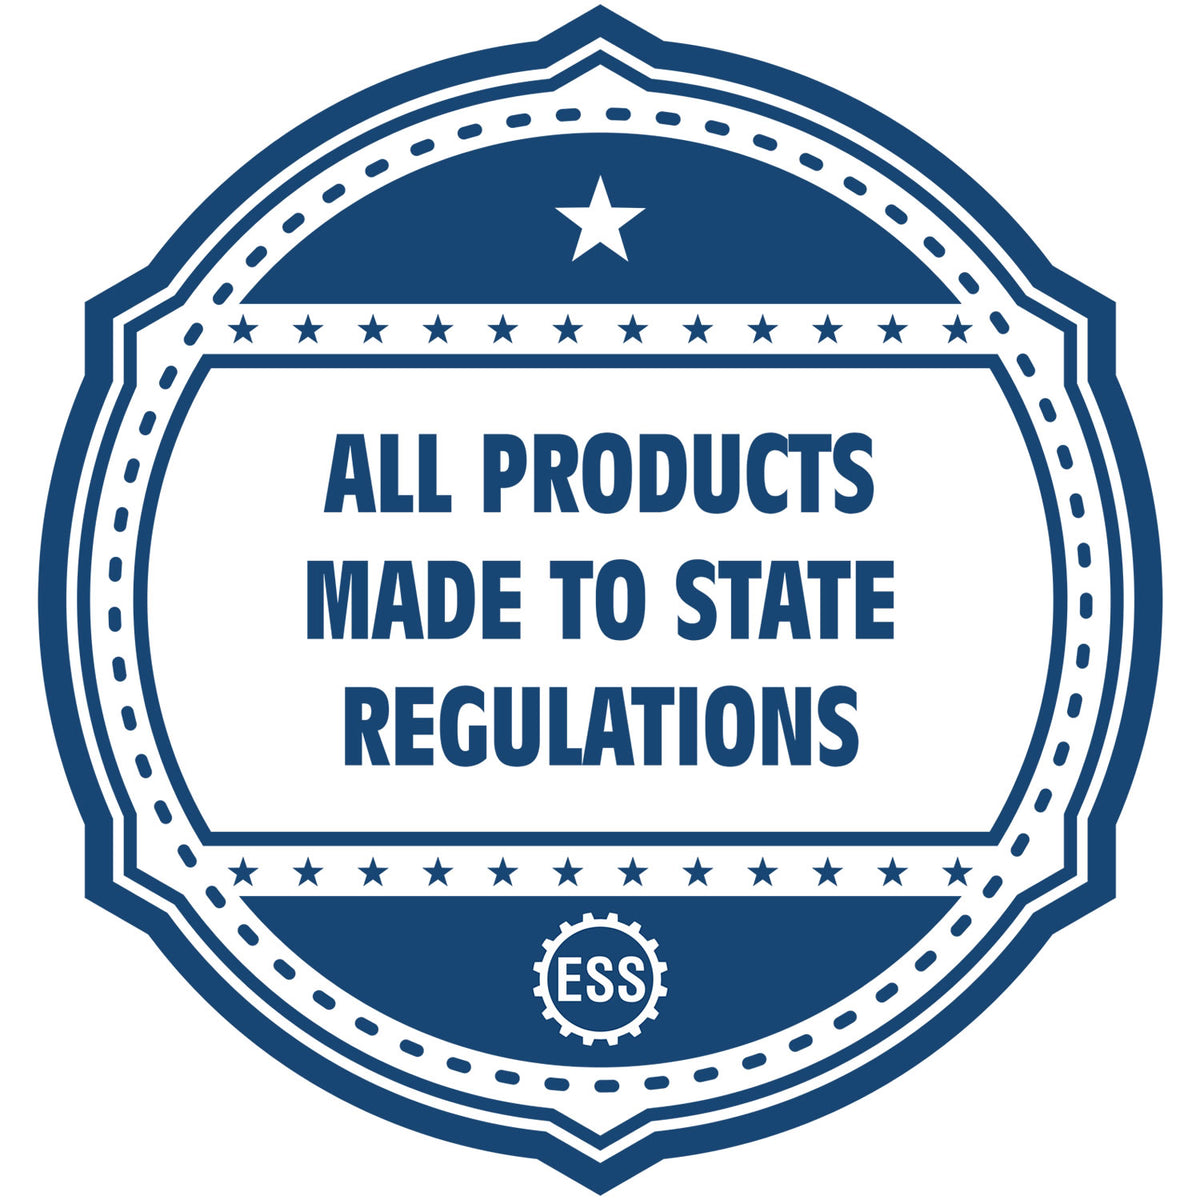 An icon or badge element for the Self-Inking Idaho PE Stamp showing that this product is made in compliance with state regulations.